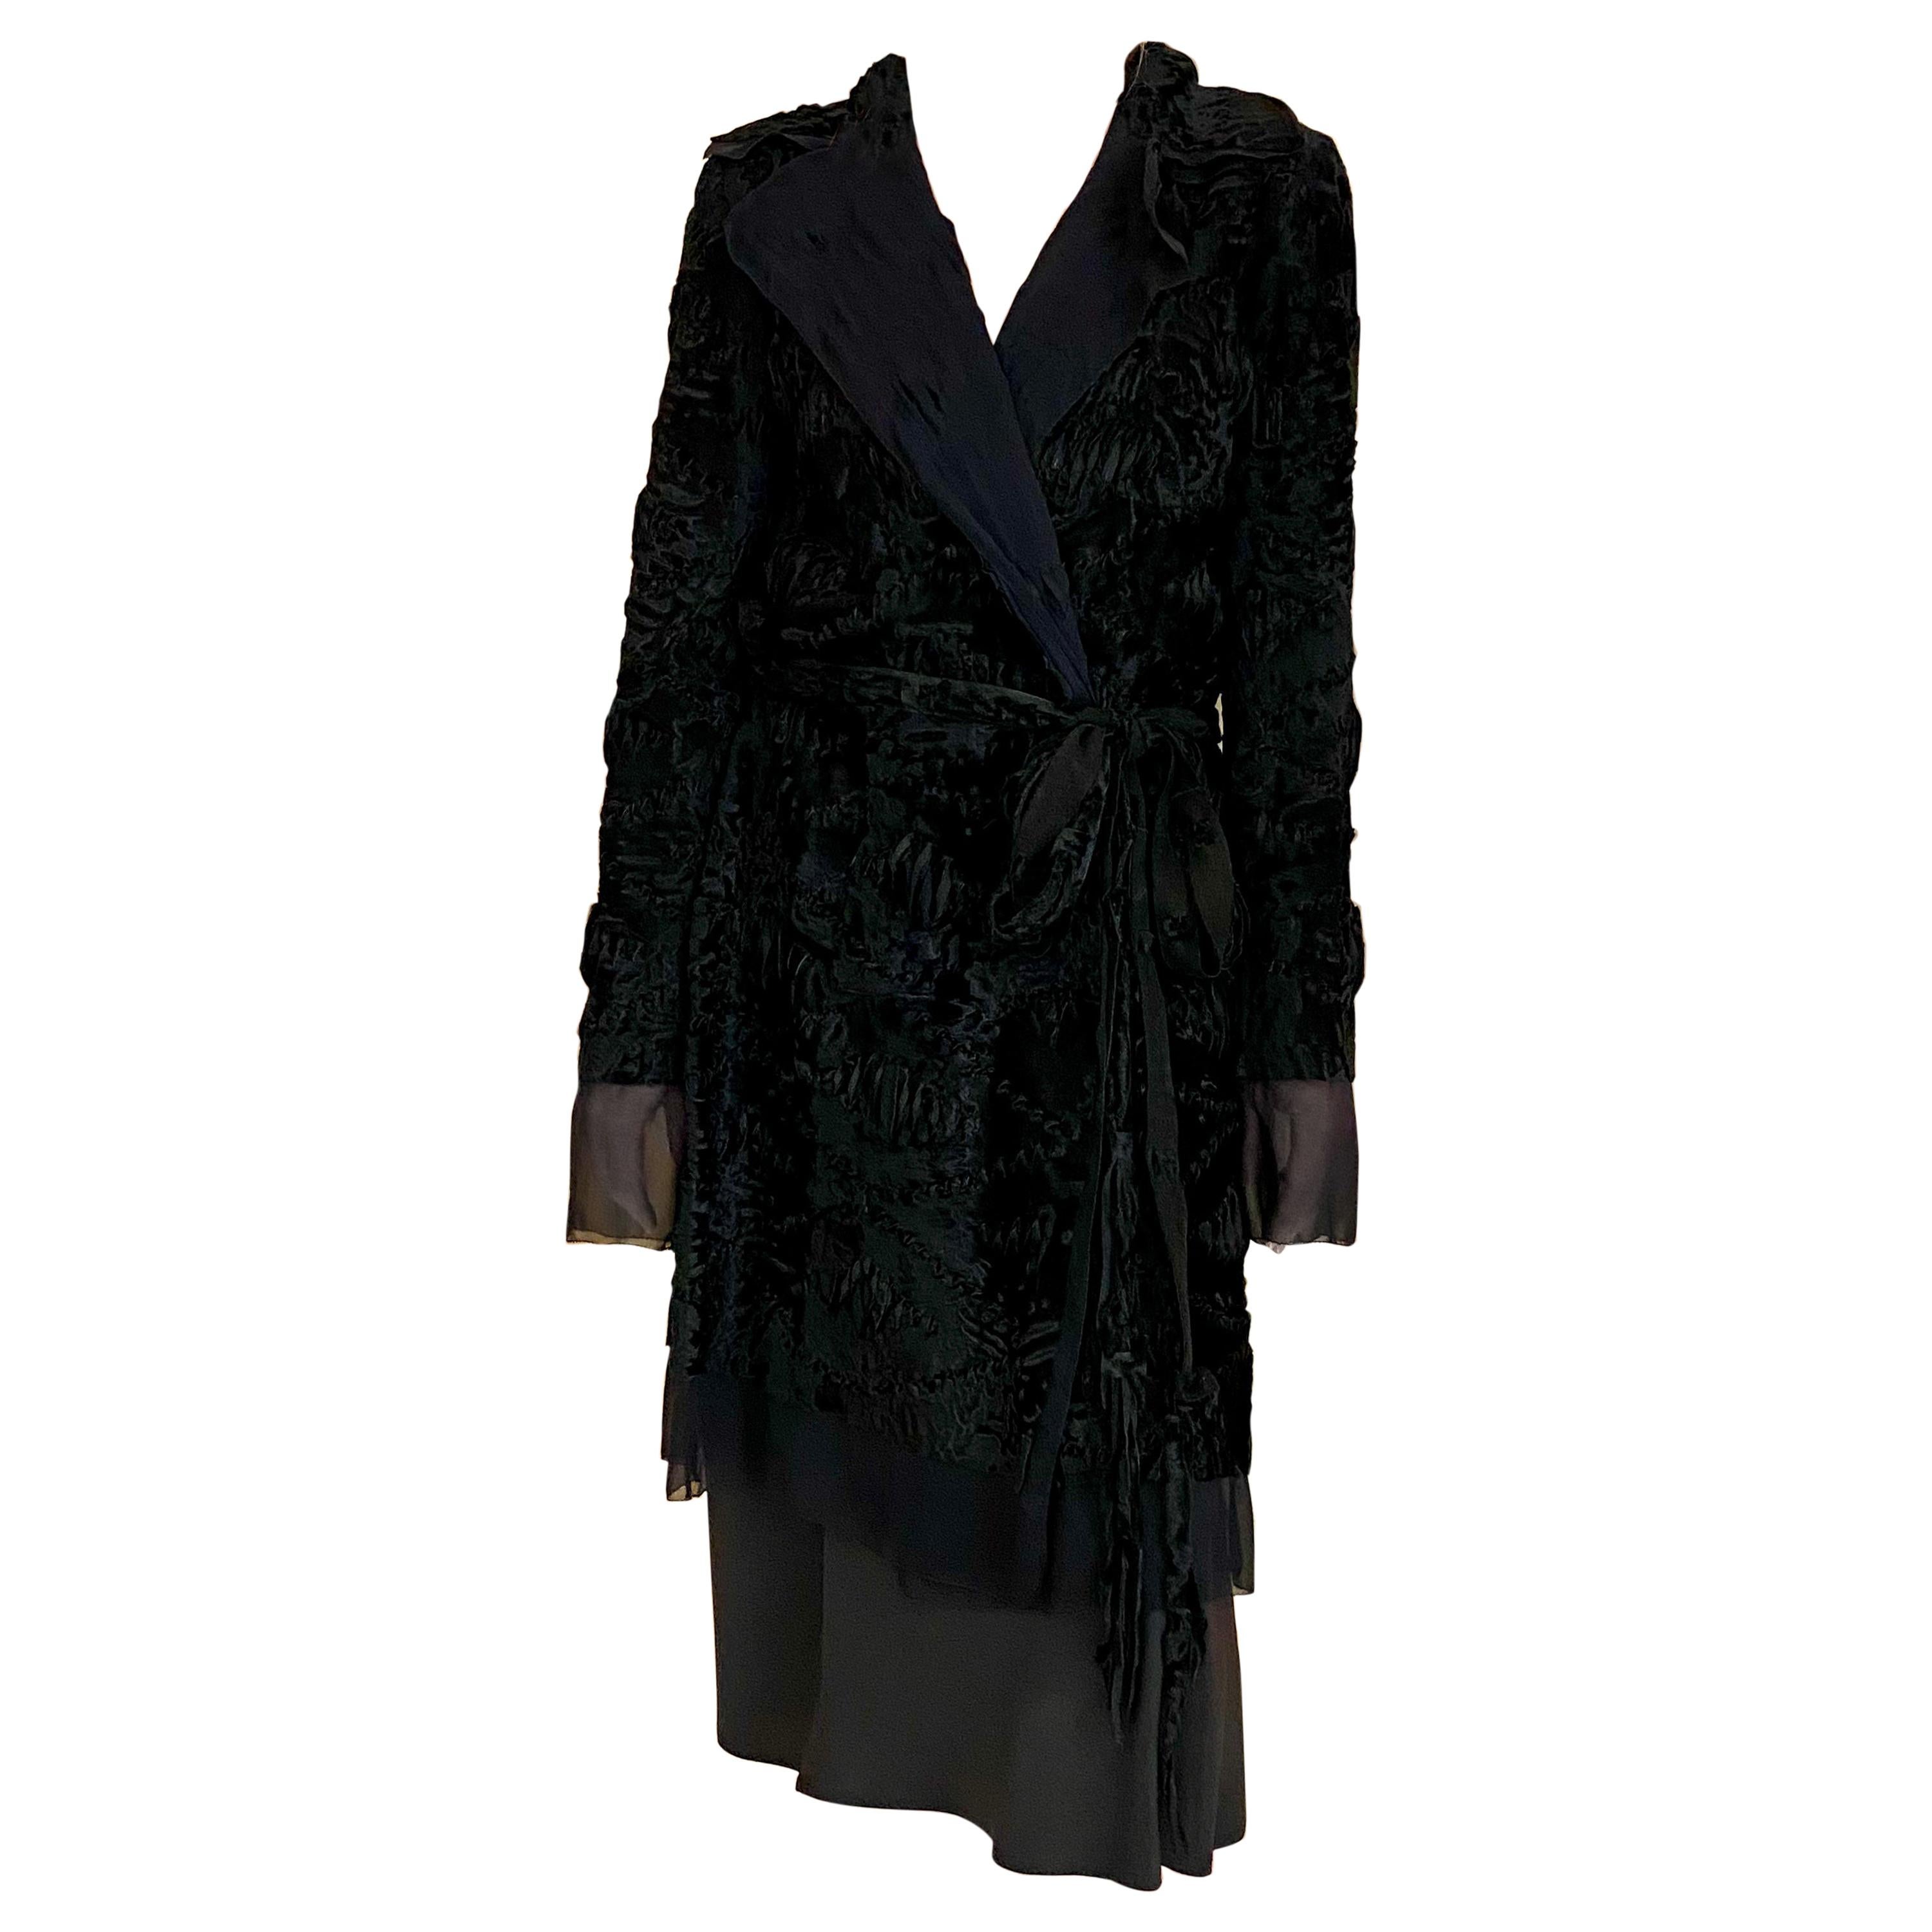 GUCCI by Tom Ford Black Silk Evening Coat